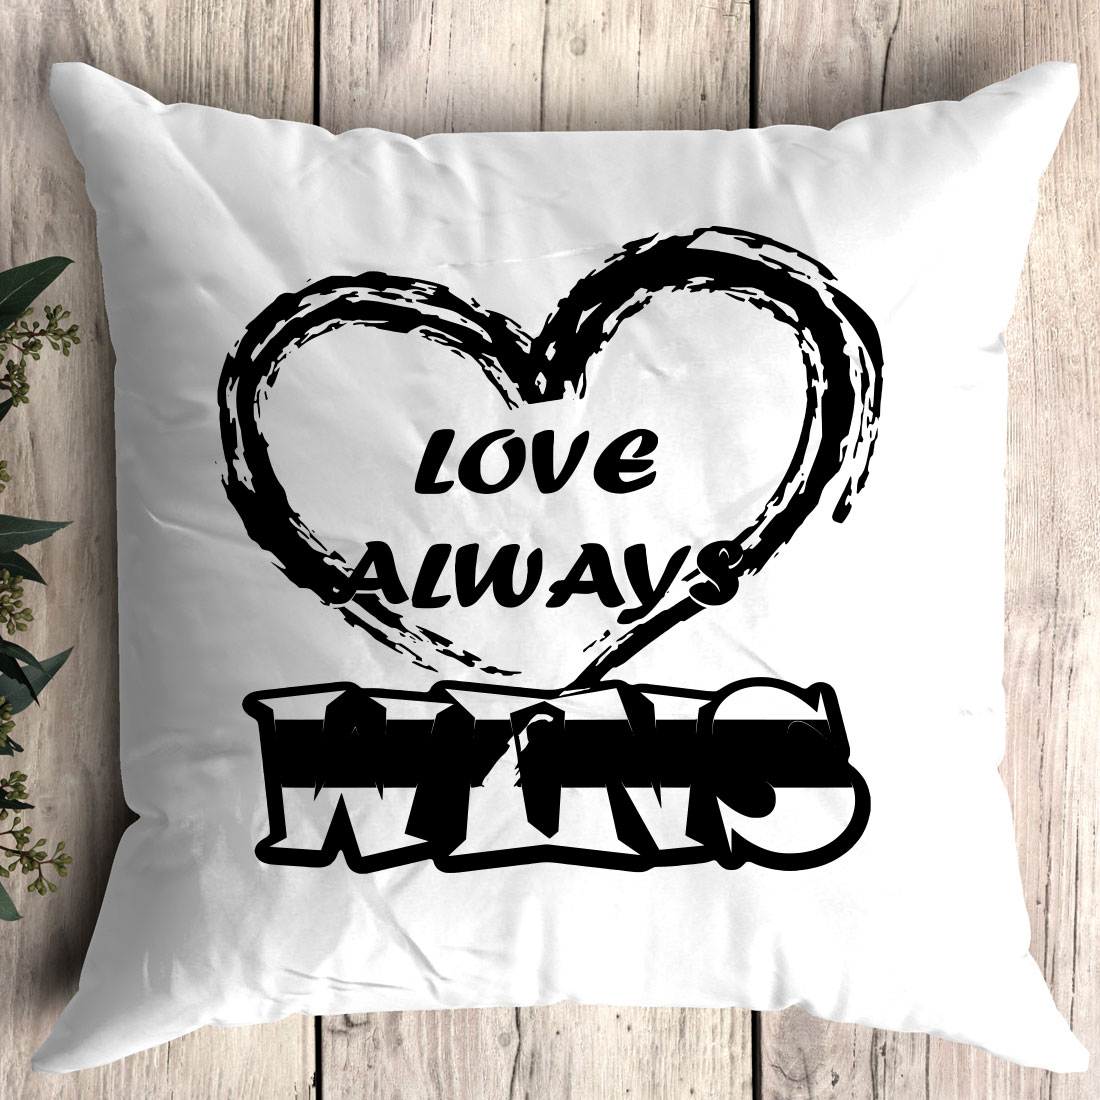 White pillow with the words love always on it.